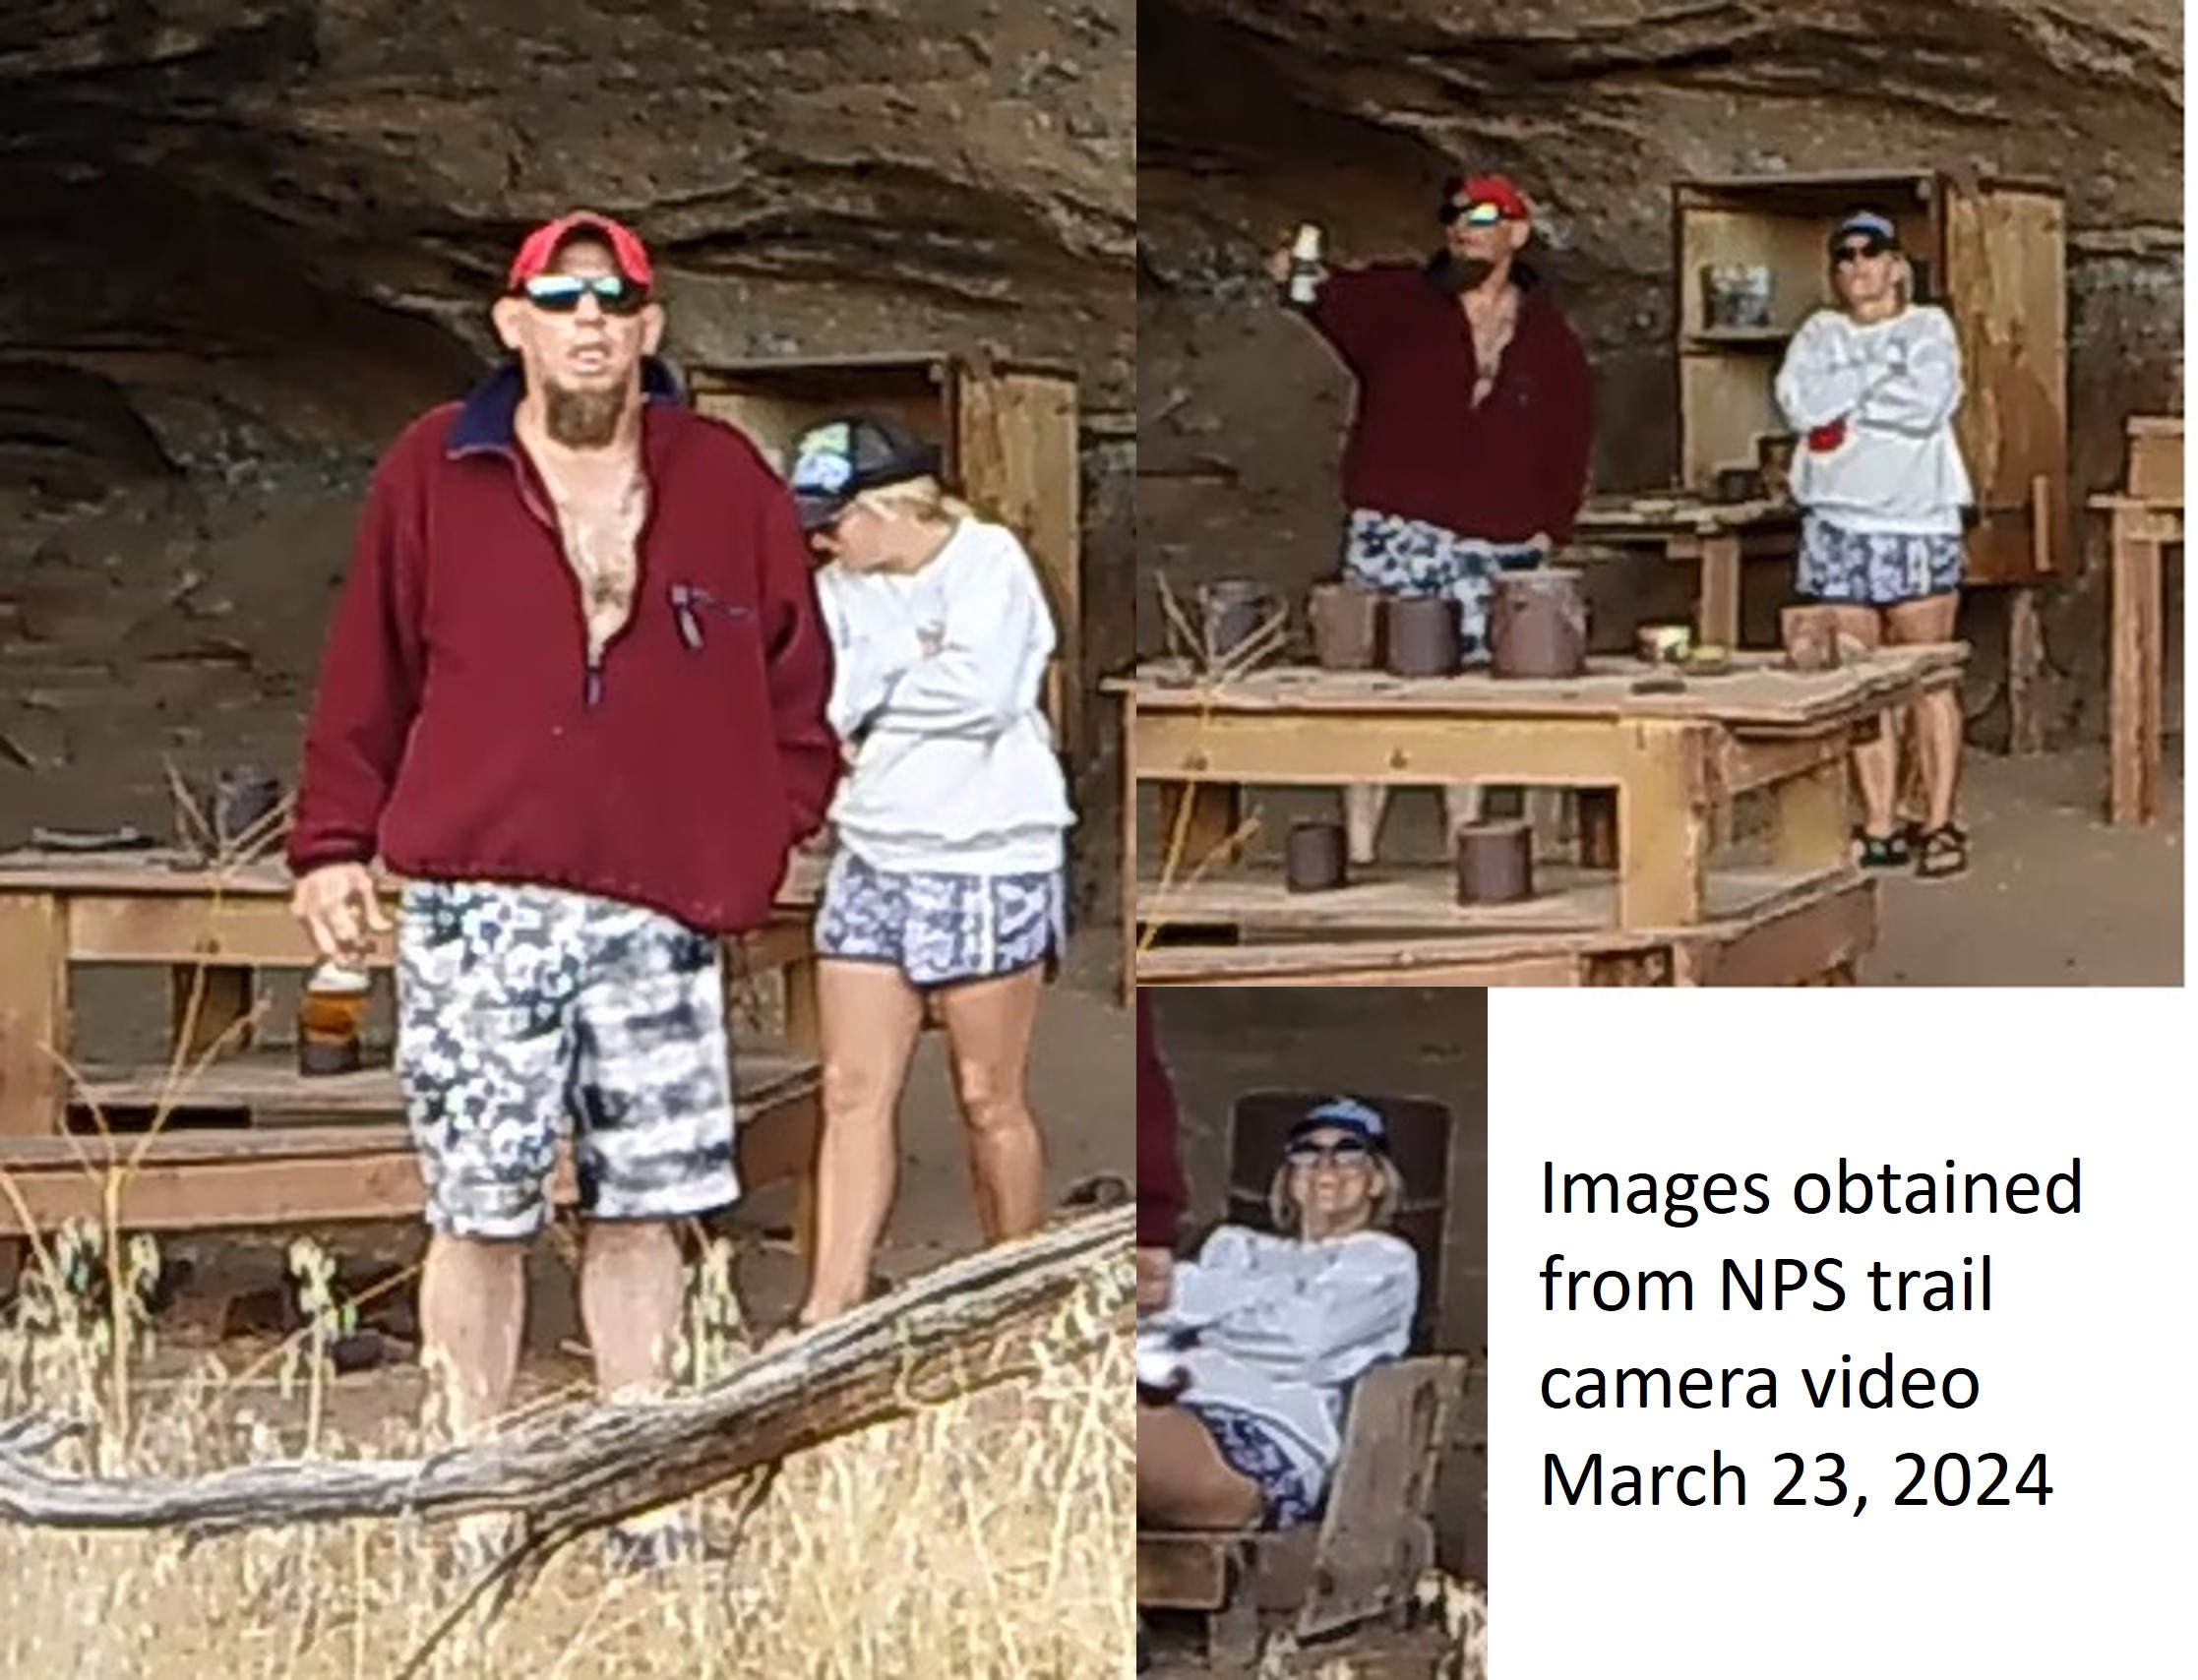 composite of three photos showing White male and White female behind wooden fence near table with rusted tin cans